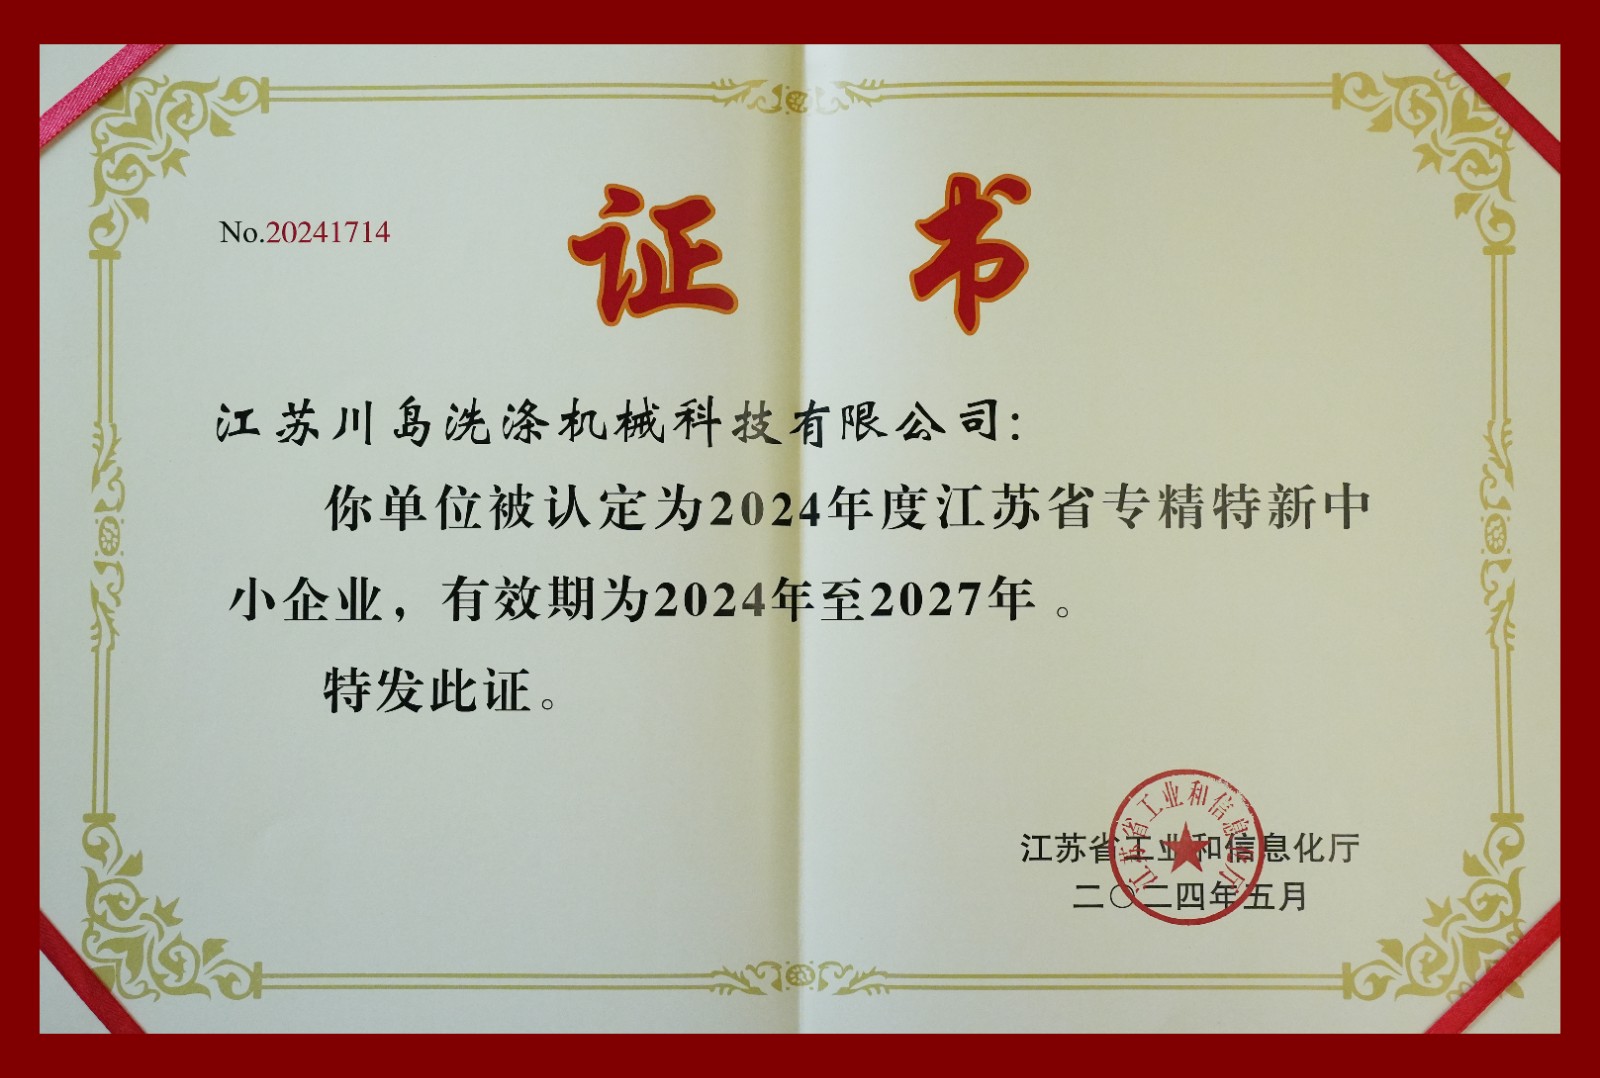 CLM Honored as a "2024 Jiangsu Province Specialized, Refined, Differential and Innovative SMEs "!